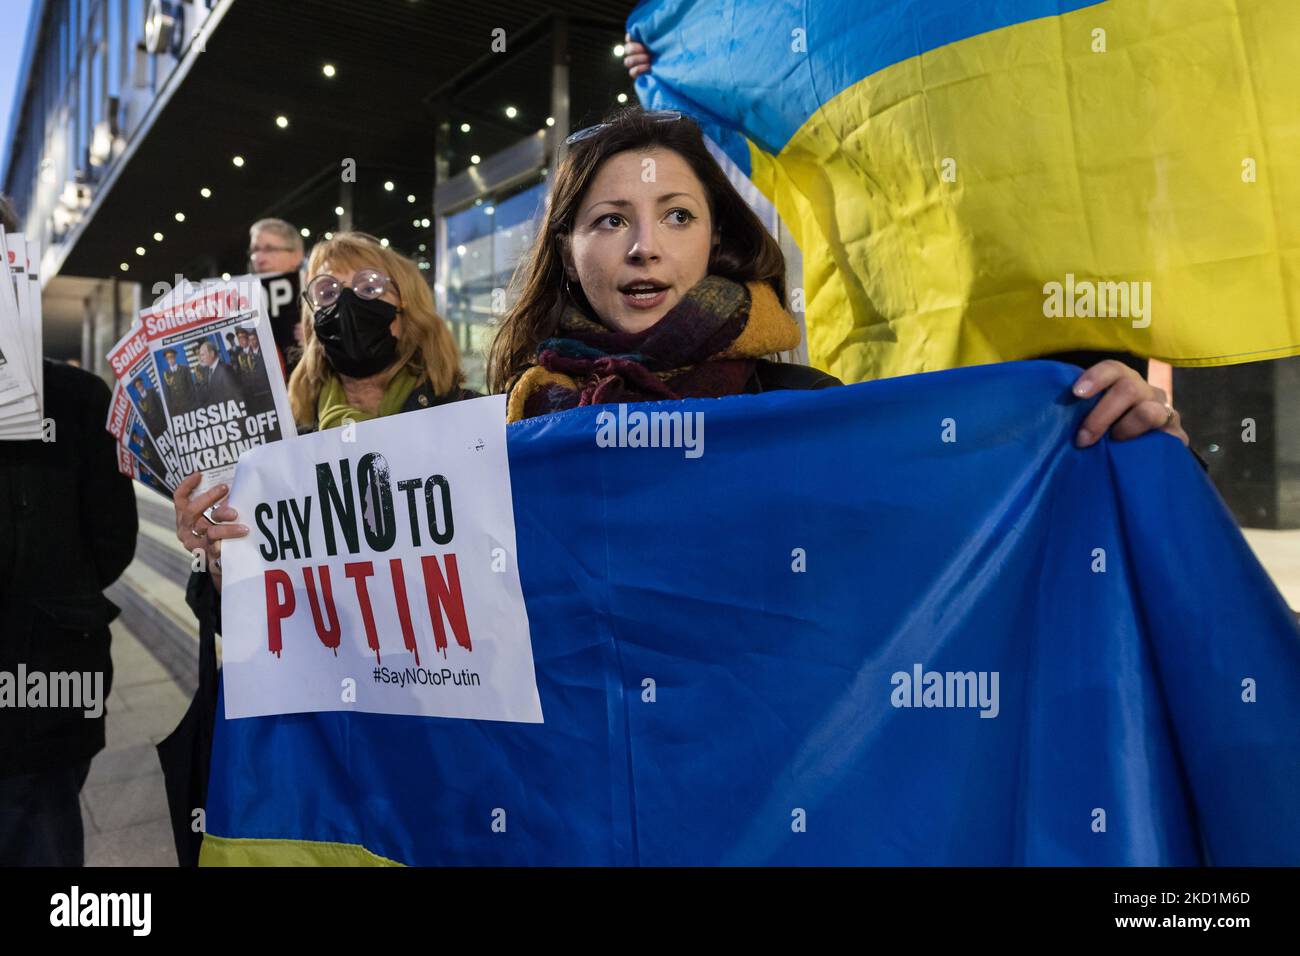 LONDON, UNITED KINGDOM - JANUARY 31, 2022: Protesters hold Ukrainian flags as they demonstrate outside the studios of RT, Russian state-owned international television network, against Russia's military build-up on the border with Ukraine amid rising tensions between East and West on January 31, 2022 in London, England. An estimated 100,000 Russian troops, tanks, artillery and missiles are deployed near the border with Ukraine but the Kremlin denies invasion plans while making demands from NATO last month that Ukraine and other ex-Soviet countries are denied its membership and withdrawal of all Stock Photo